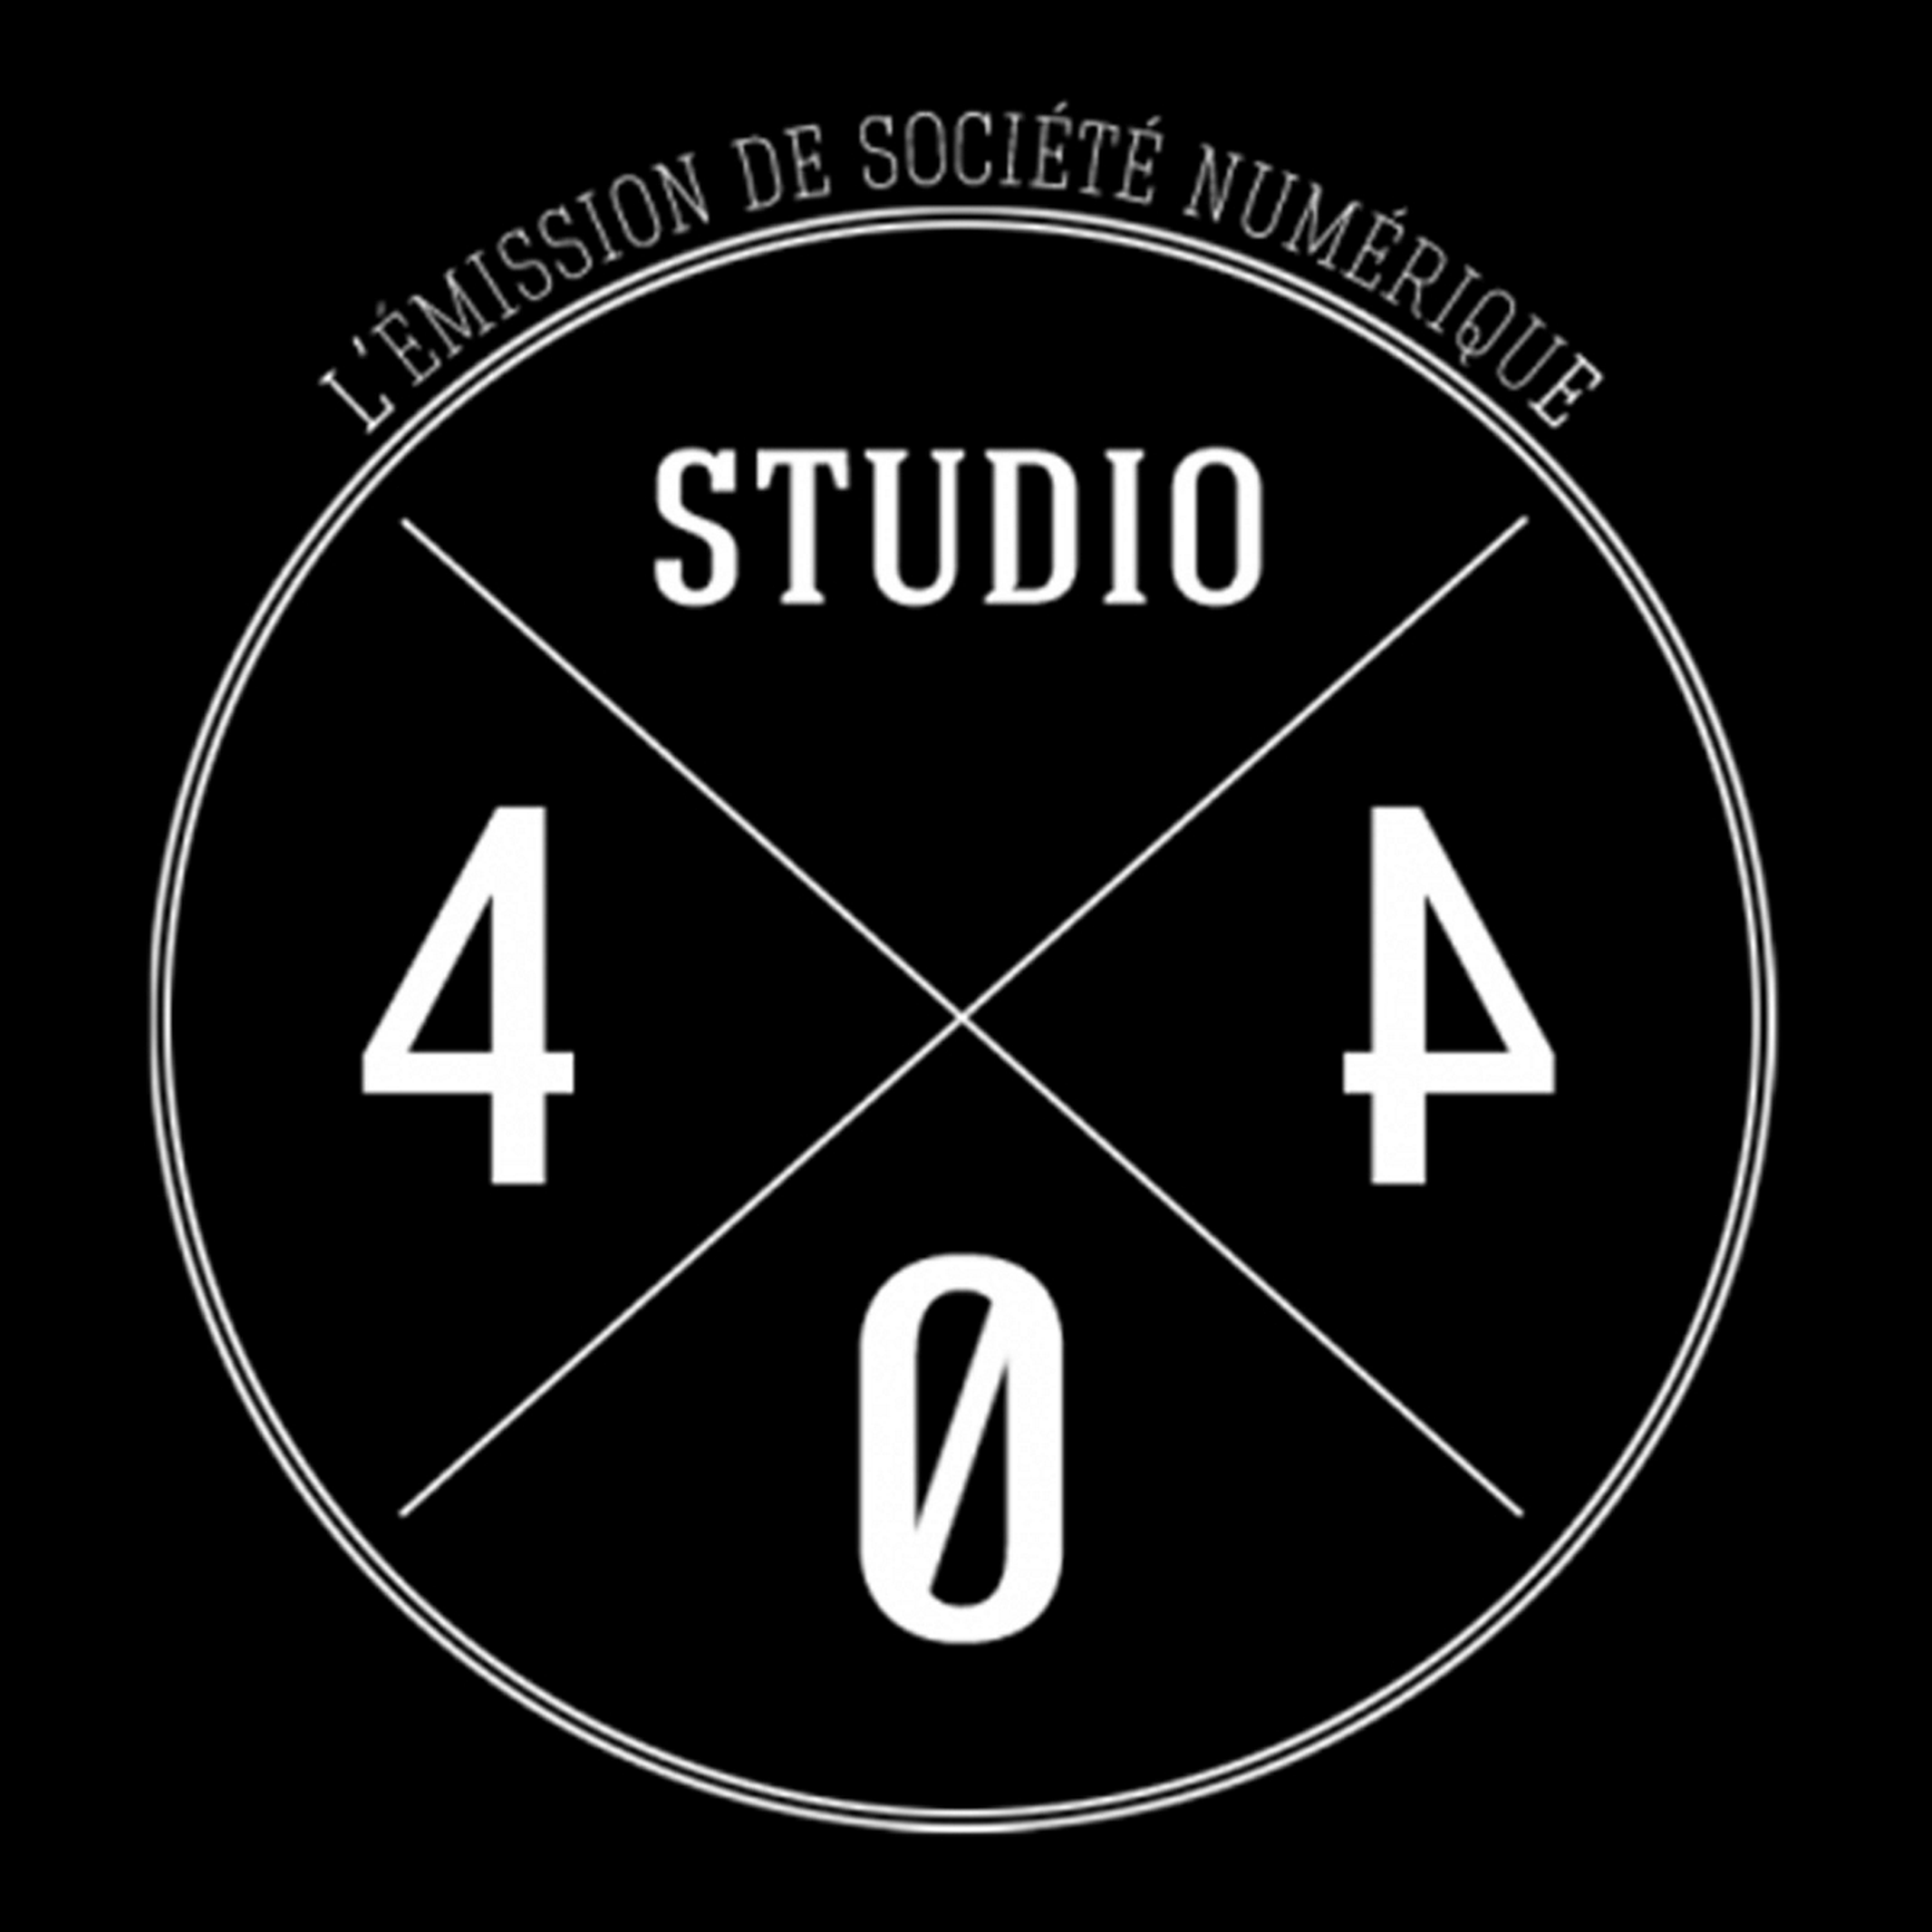 Studio 404 #53 / Octobre 2017 : Google Home, Cashless Society, Growth Hacking, culture Silicon Valley